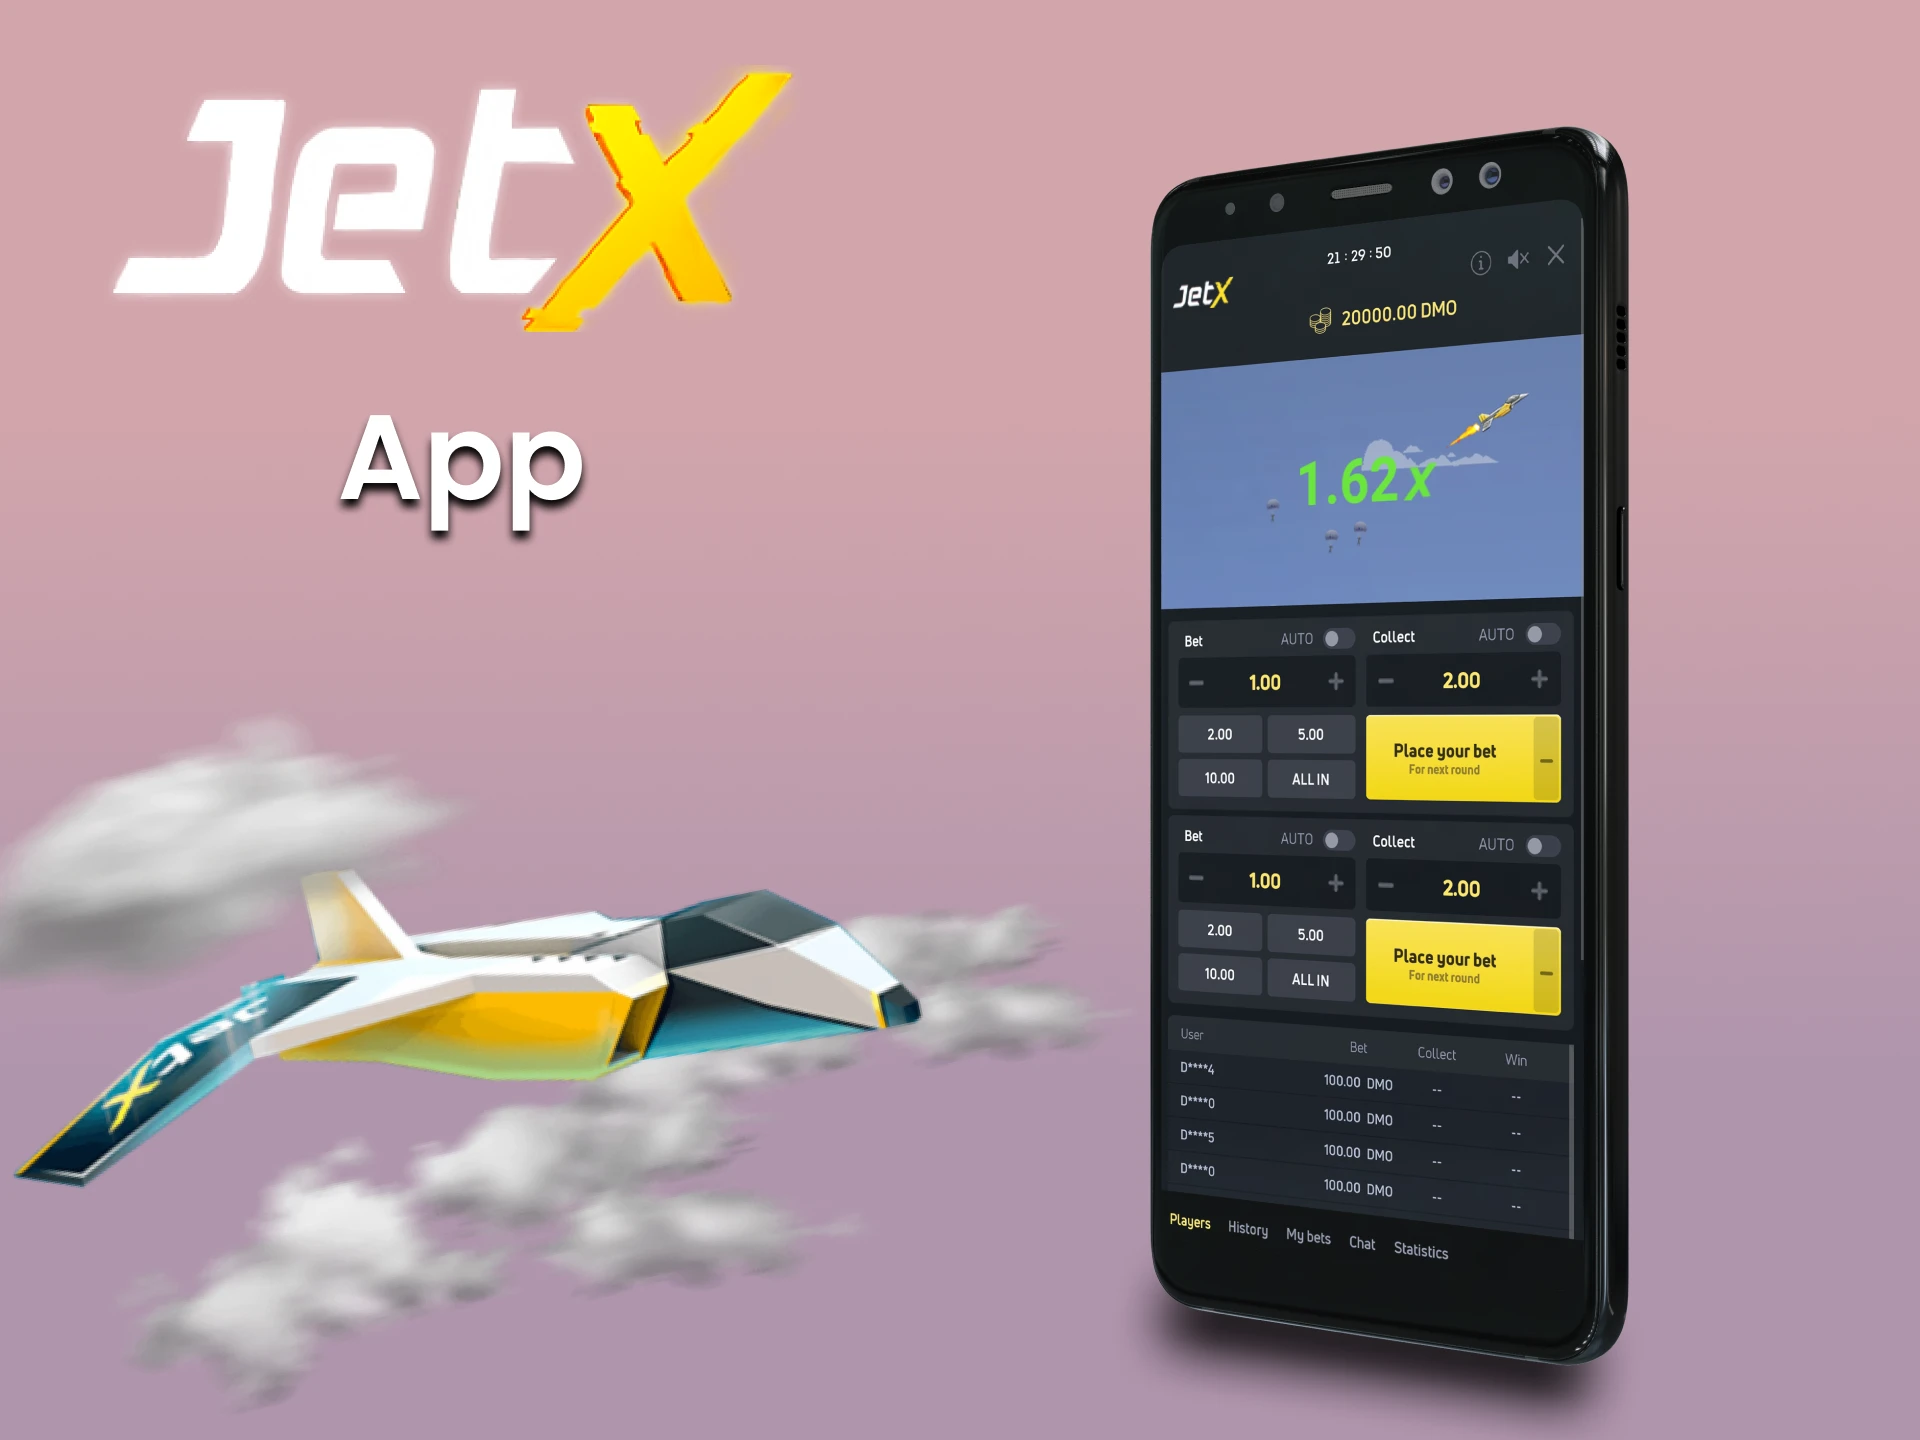 Play JetX through the app on your phone.